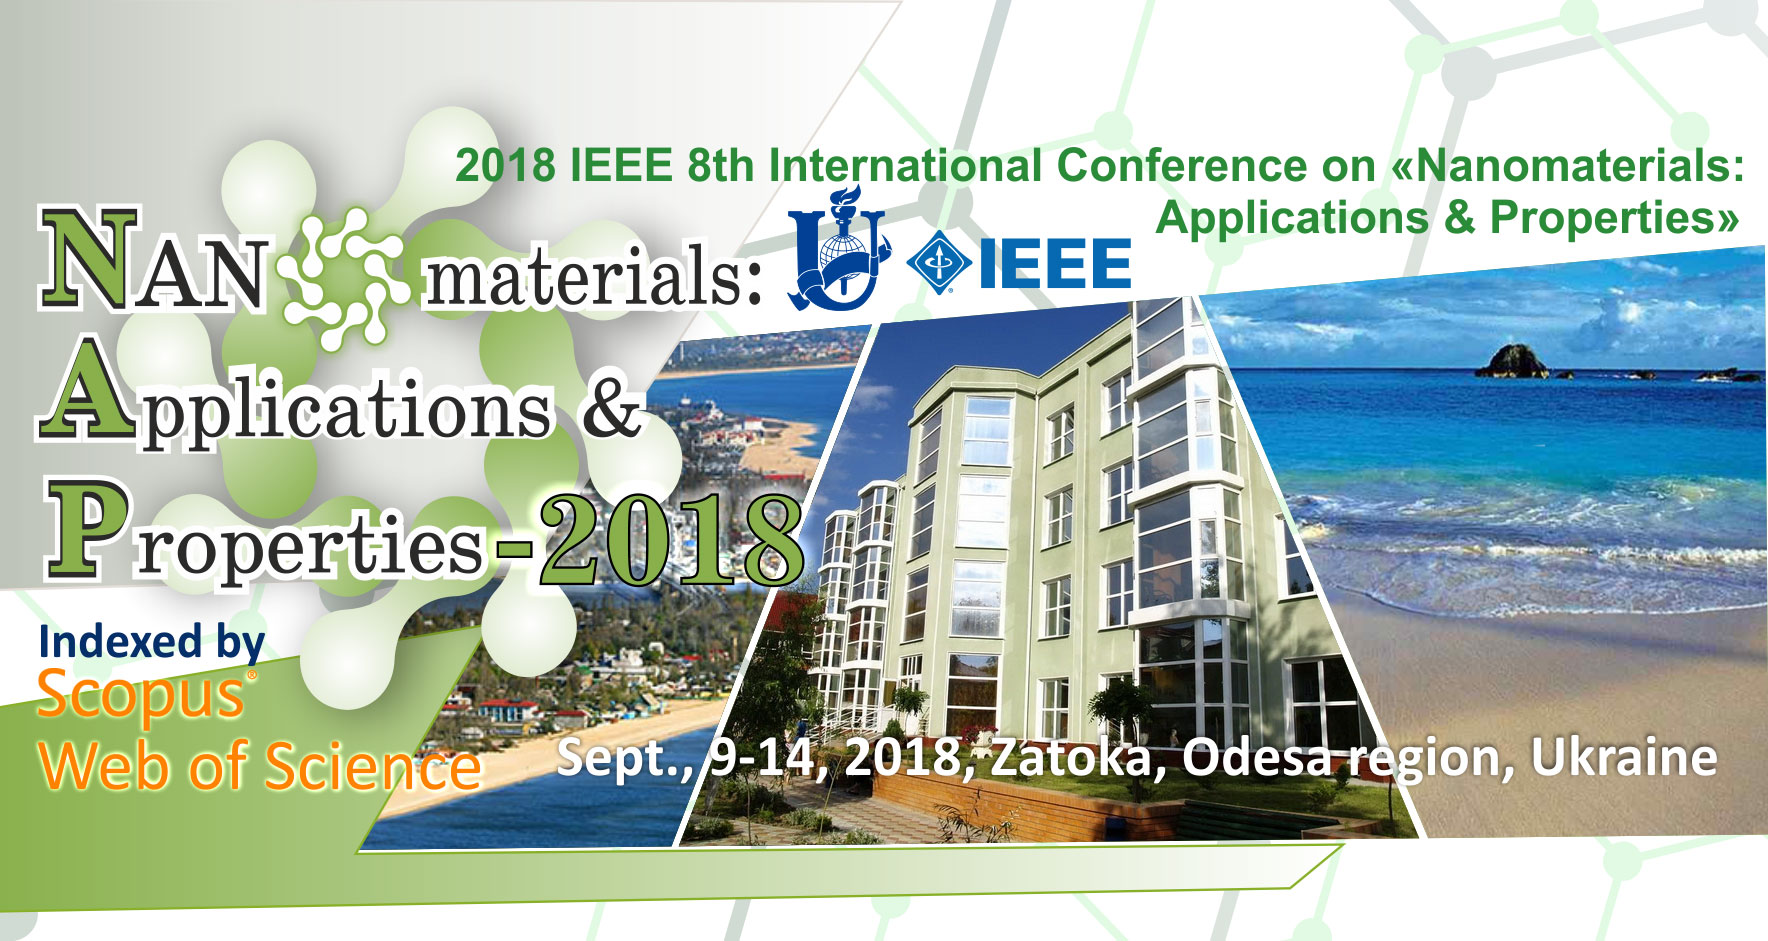 2018 IEEE International Conference on “Nanomaterials Applications & Properties”